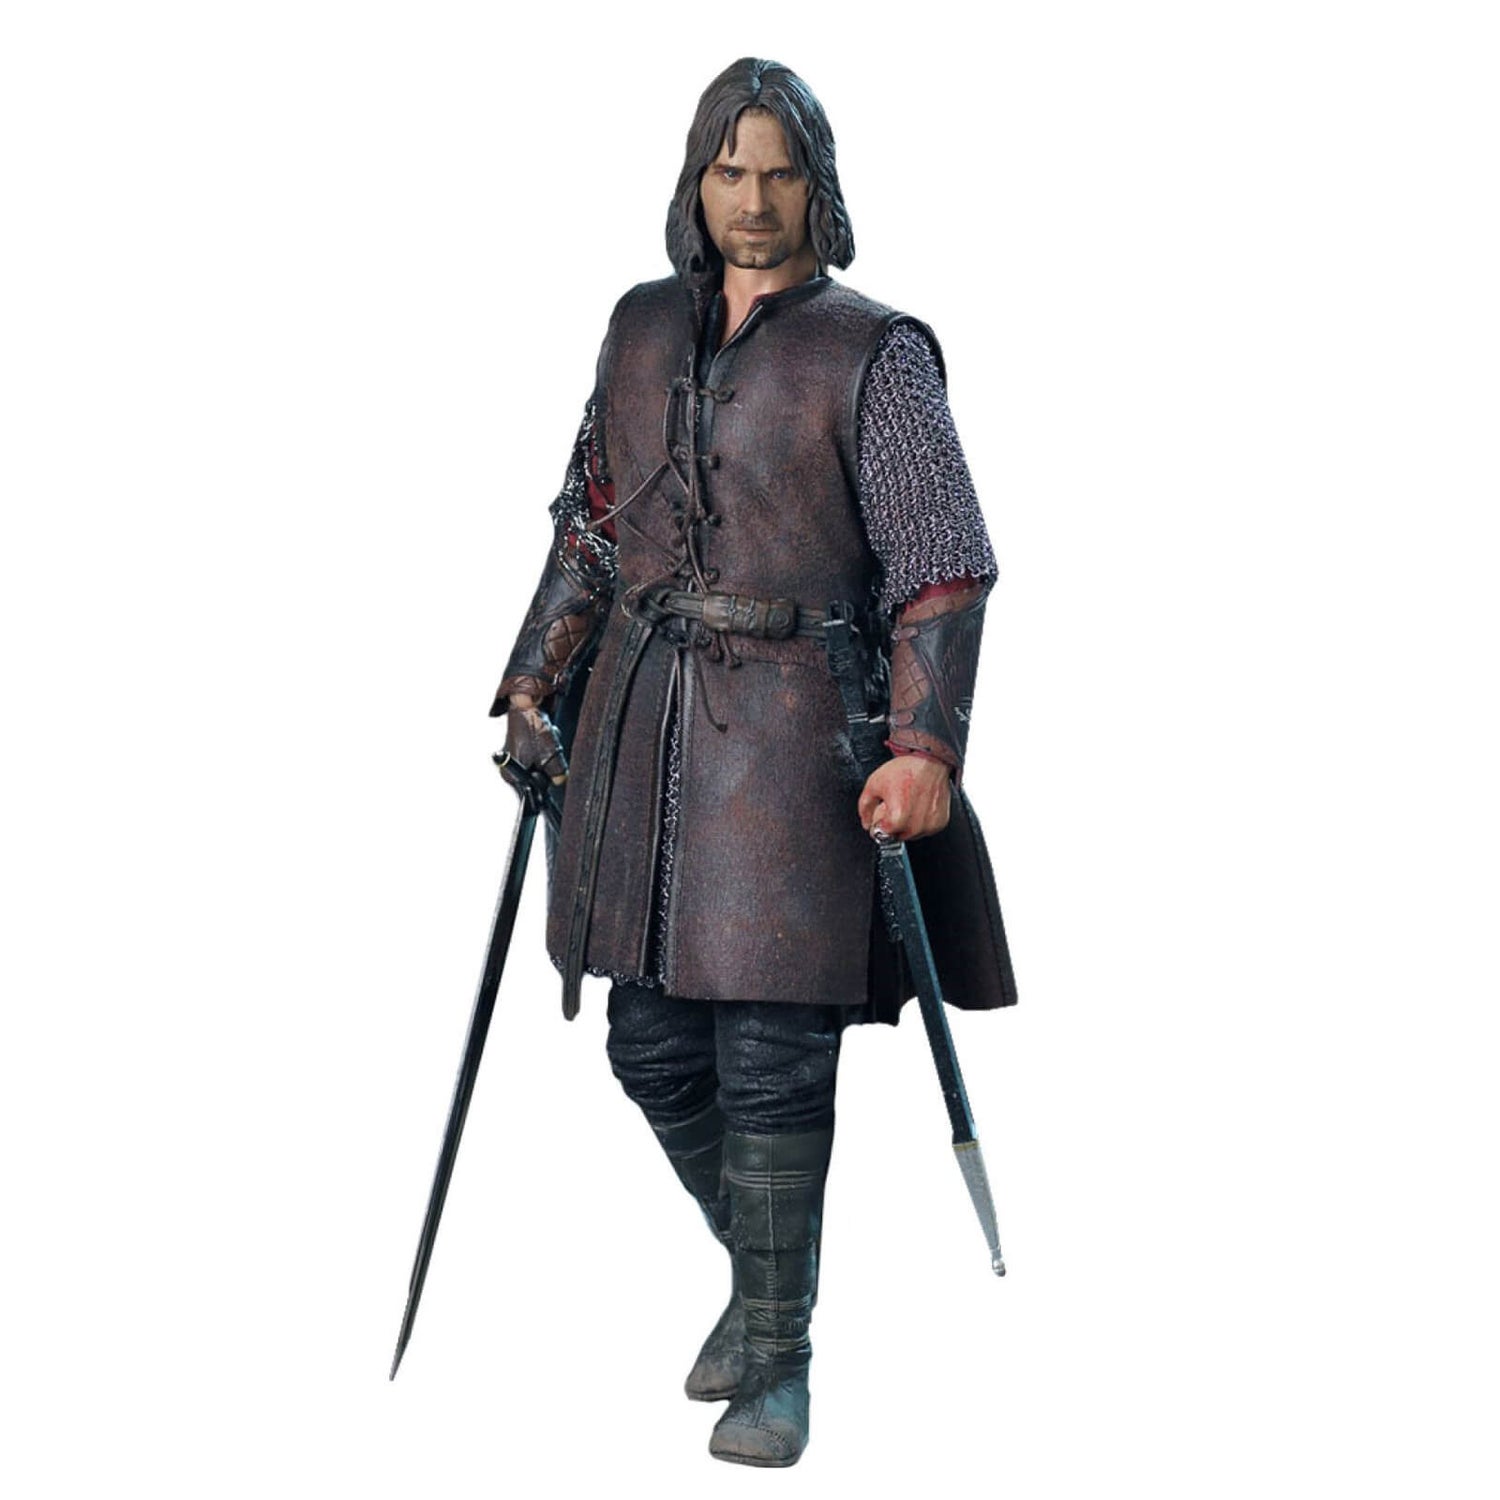 Asmus Toys Lord Of The Rings 12 Inch